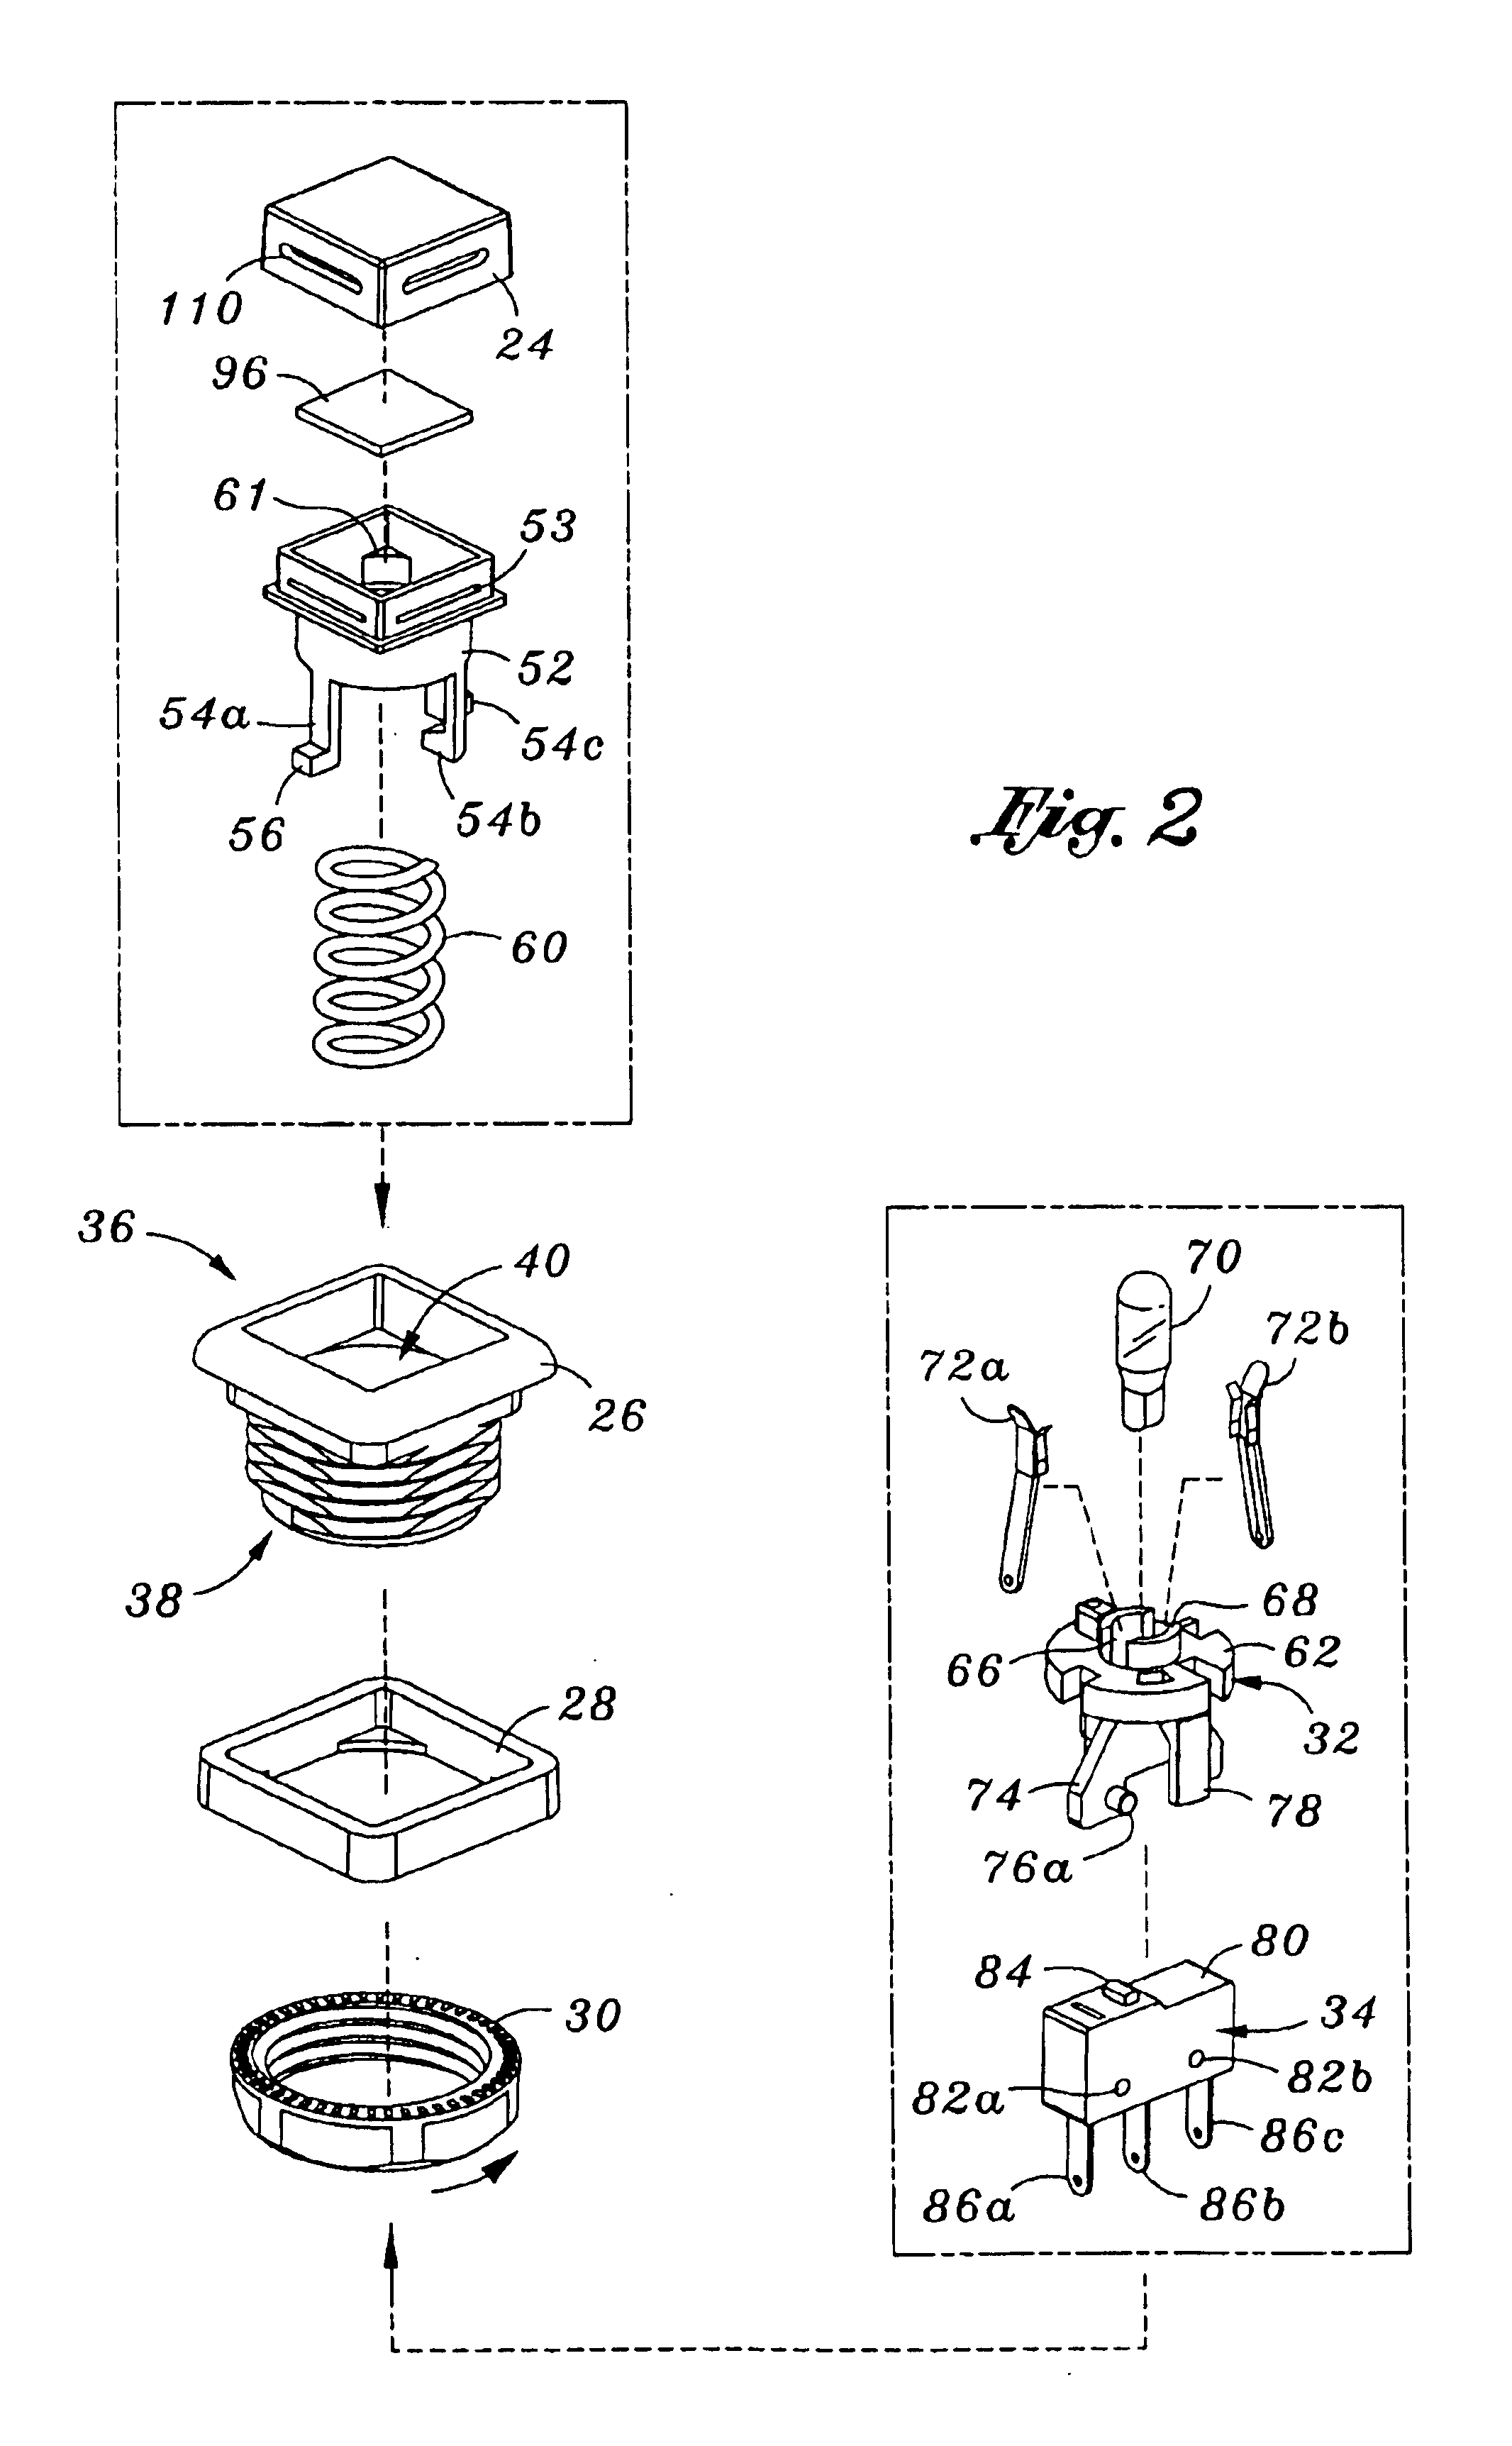 Method and apparatus for removing and replacing bulb of push-button type electrical switch